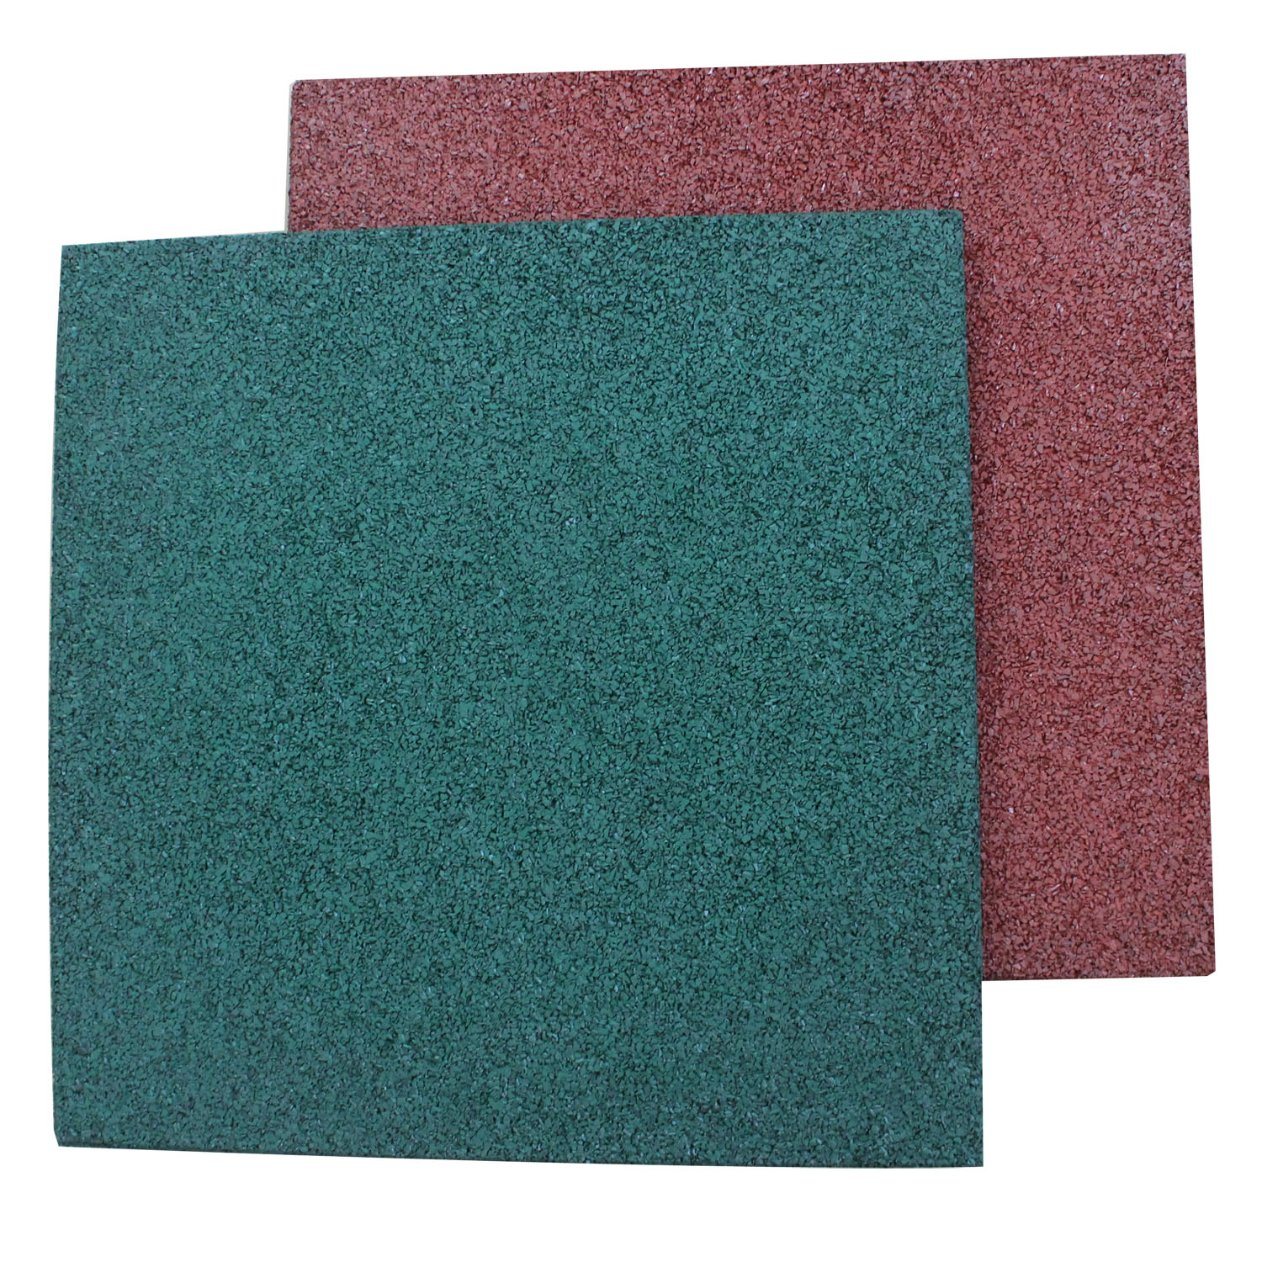 Recycle Rubber Tile Interlocking Rubber Tiles Wearing-Resistant Rubber Tile